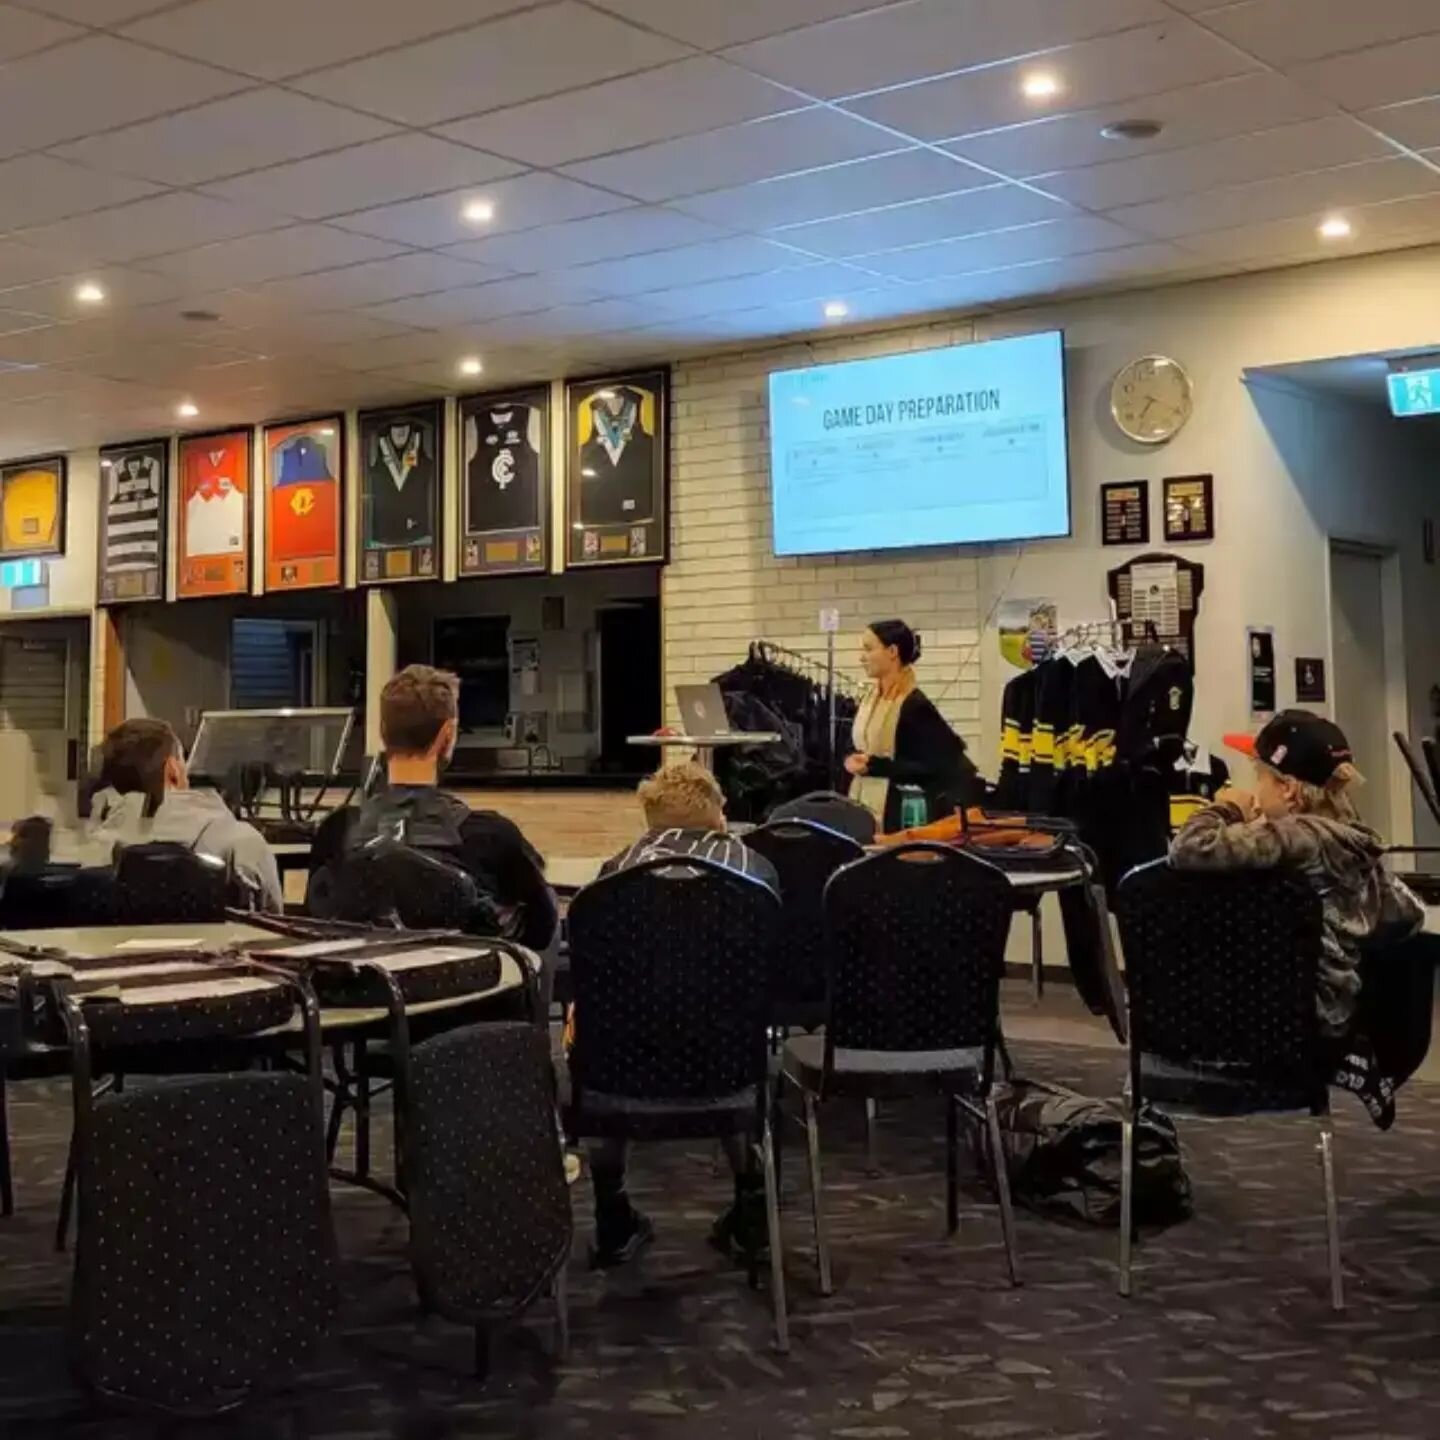 Last Tuesday I held a nutrition seminar for the athletes of the Torquay Footy Club with their lead up to finals 🏆

We discussed:
✅ Negative effects of underfuelling in athletes 
✅ The importance of fuelling adequately 
✅ Nutrition leading up to game